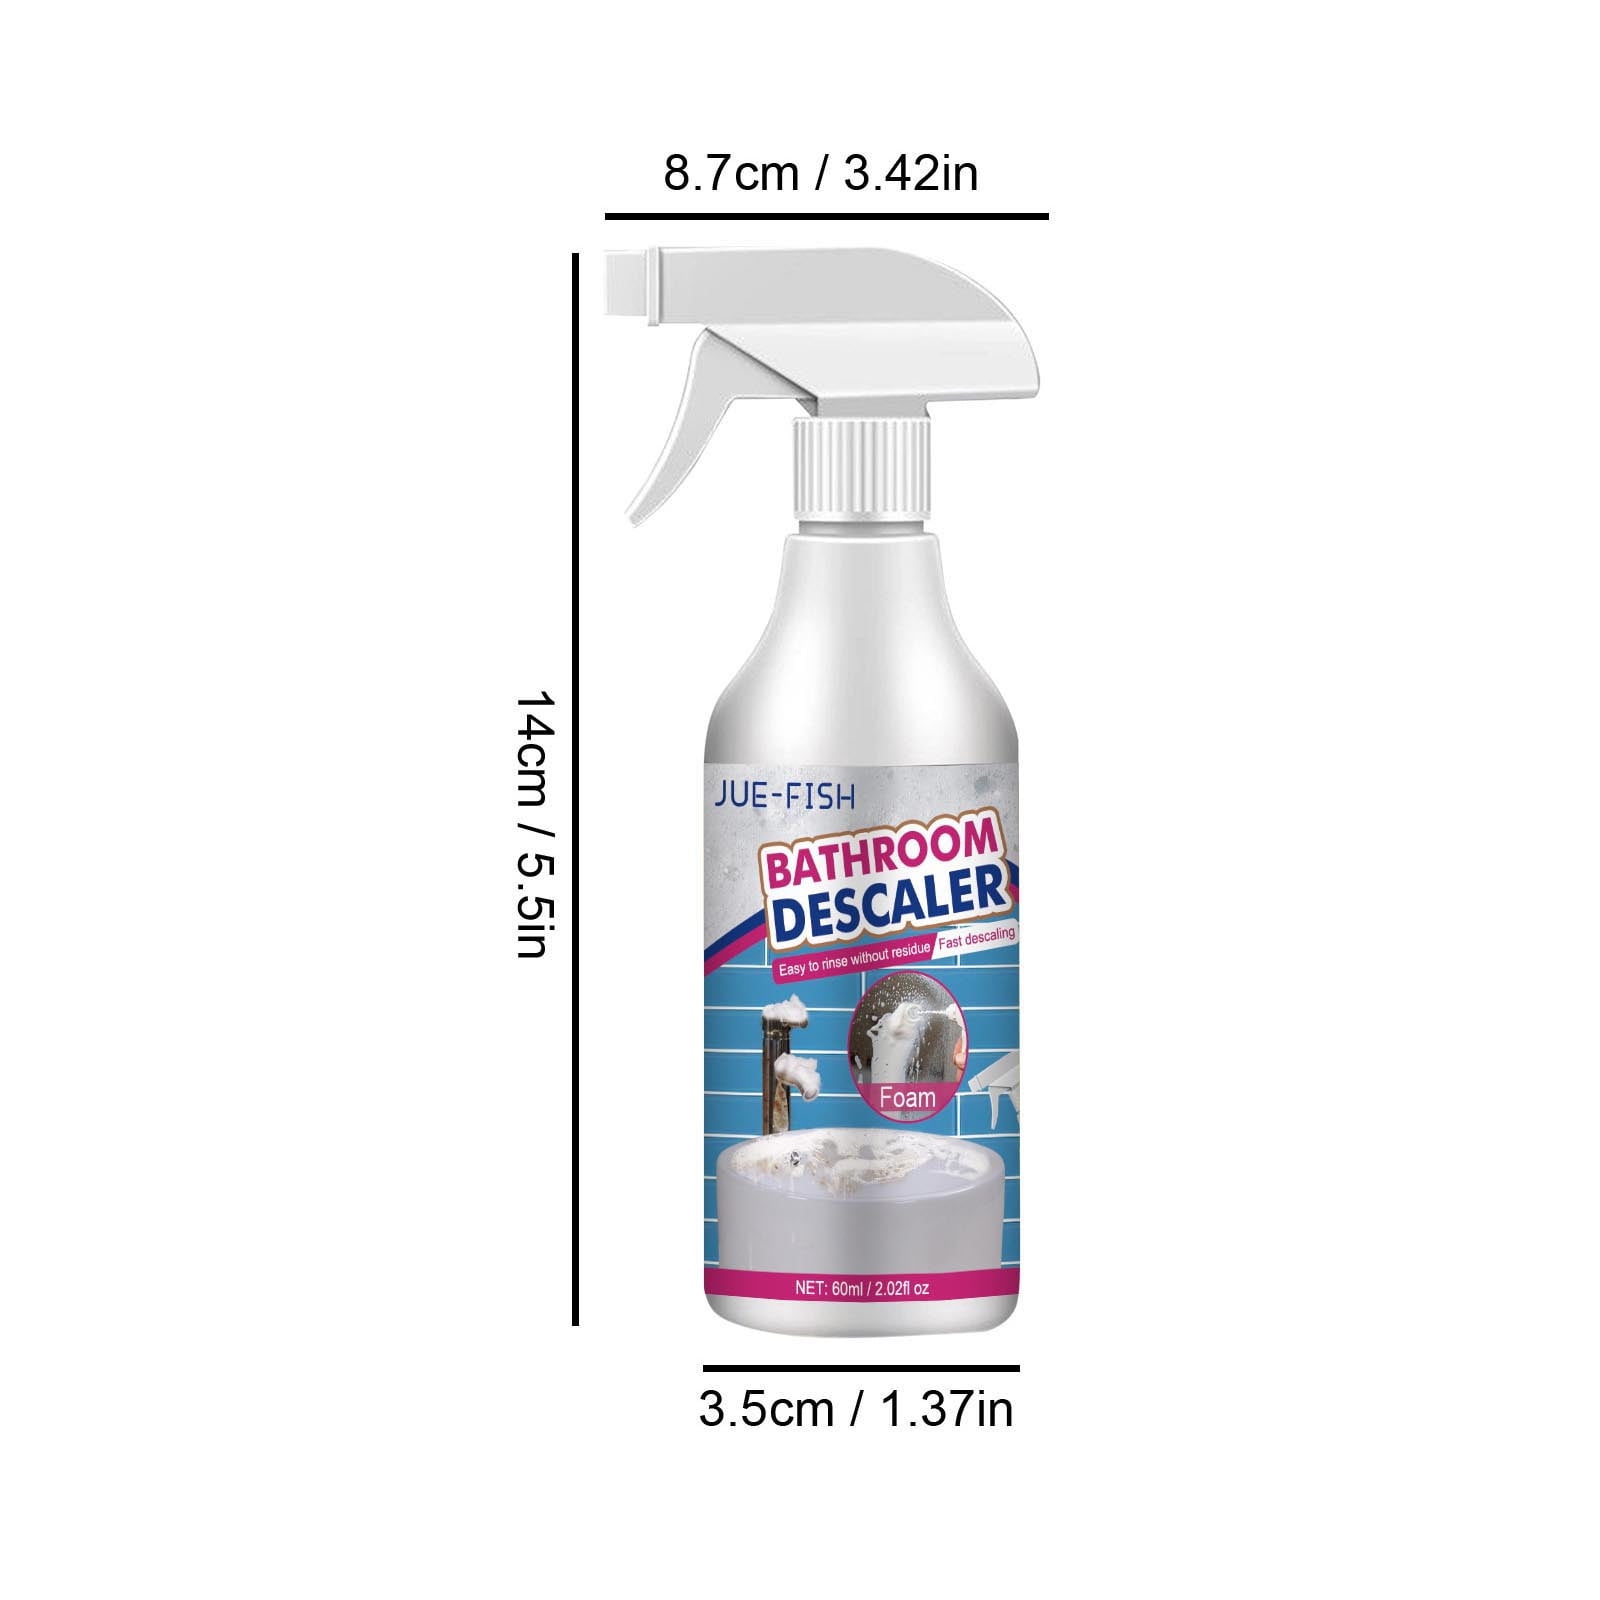 Shower Power - Powerful Bathroom Cleaner from Concentrate - Tub and Shower  Cleaner - Cleans Tubs, Toilets, Urinals, Fixtures & More-1 Gal.